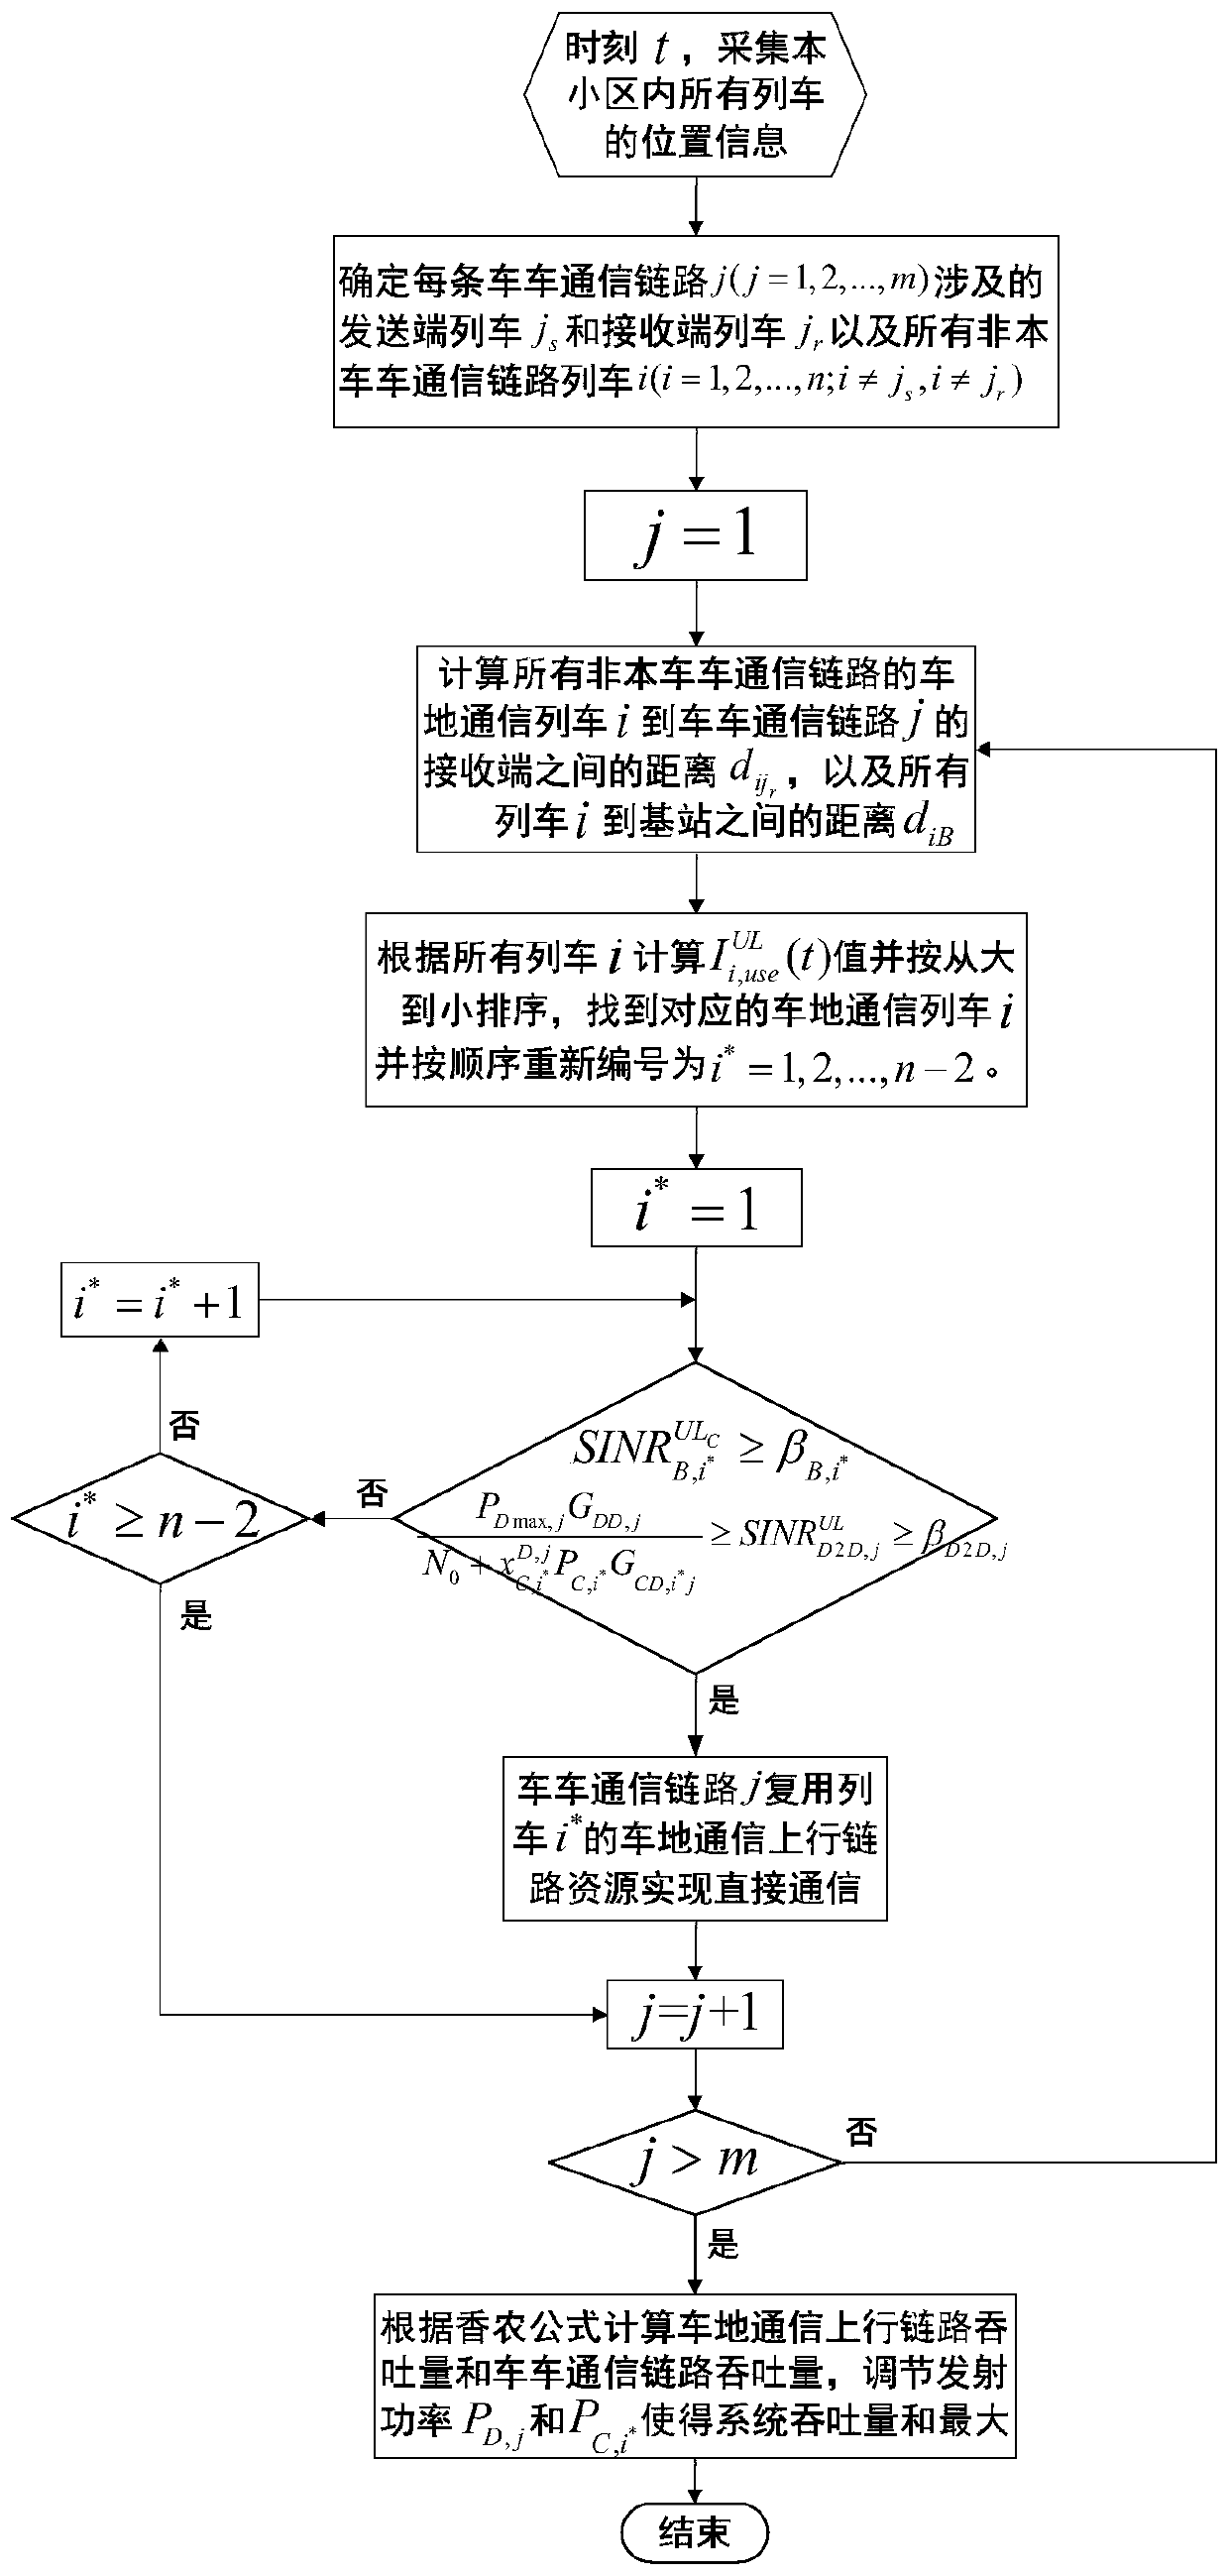 A Resource Management Method Based on Train Position and Throughput Maximization